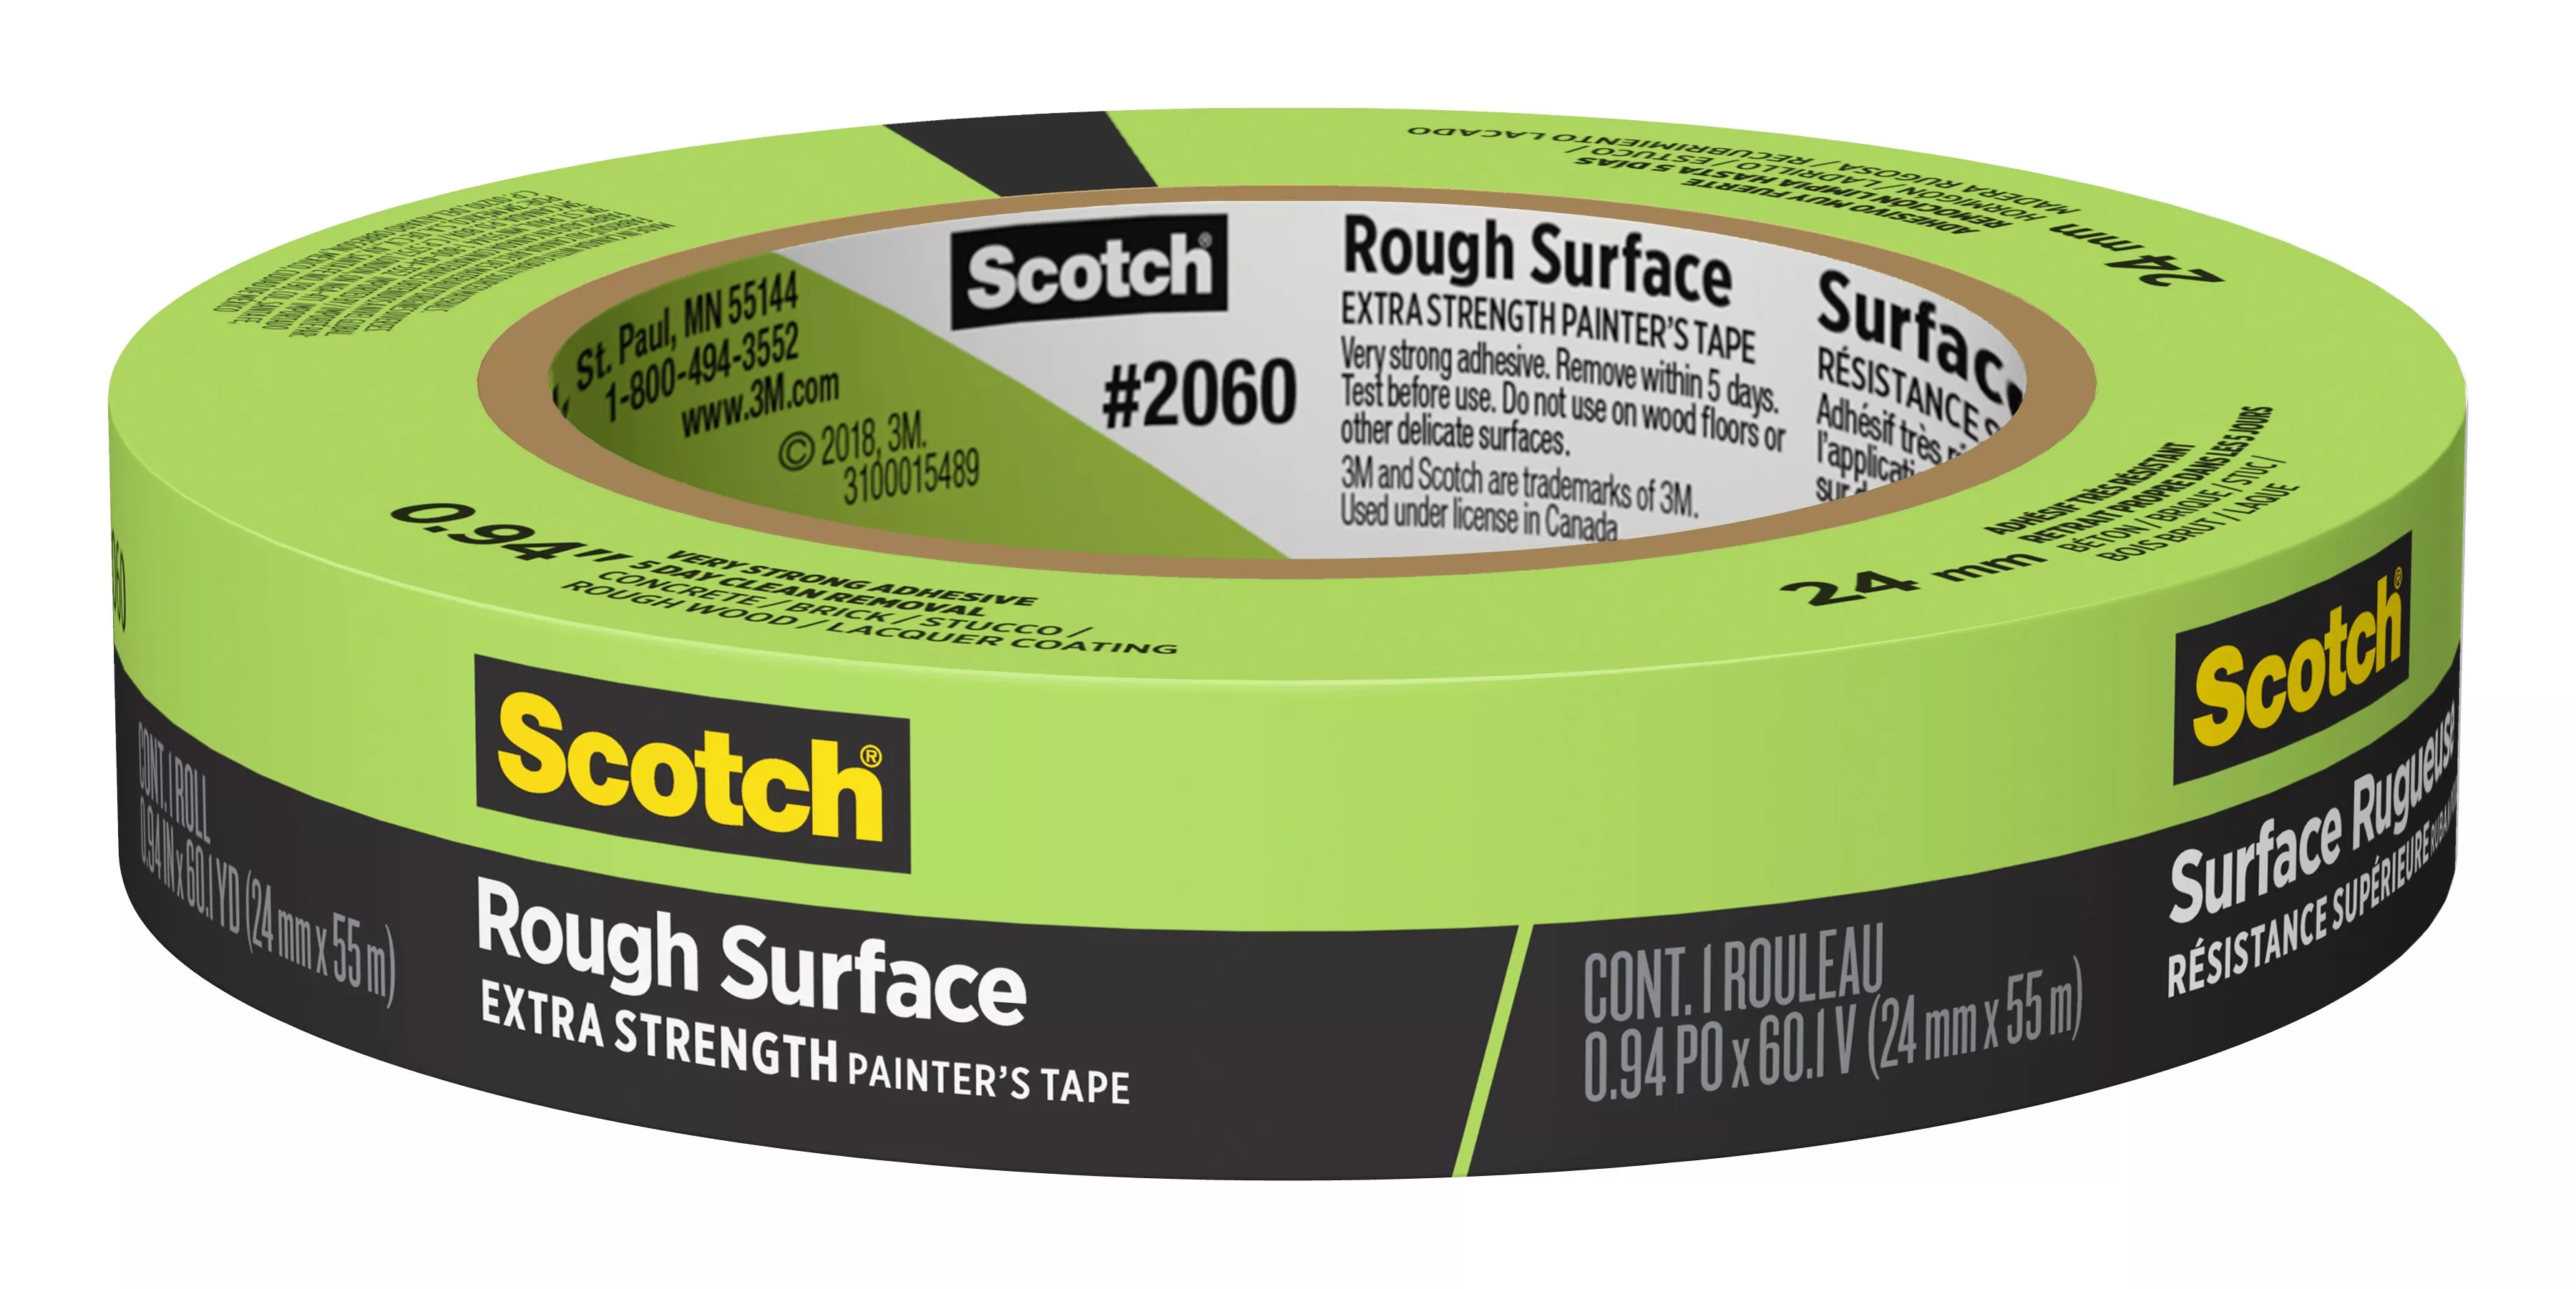 Scotch® Rough Surface Painter's Tape 2060-24AP, 0.94 in x 60.1 yd (24mm
x 55m)